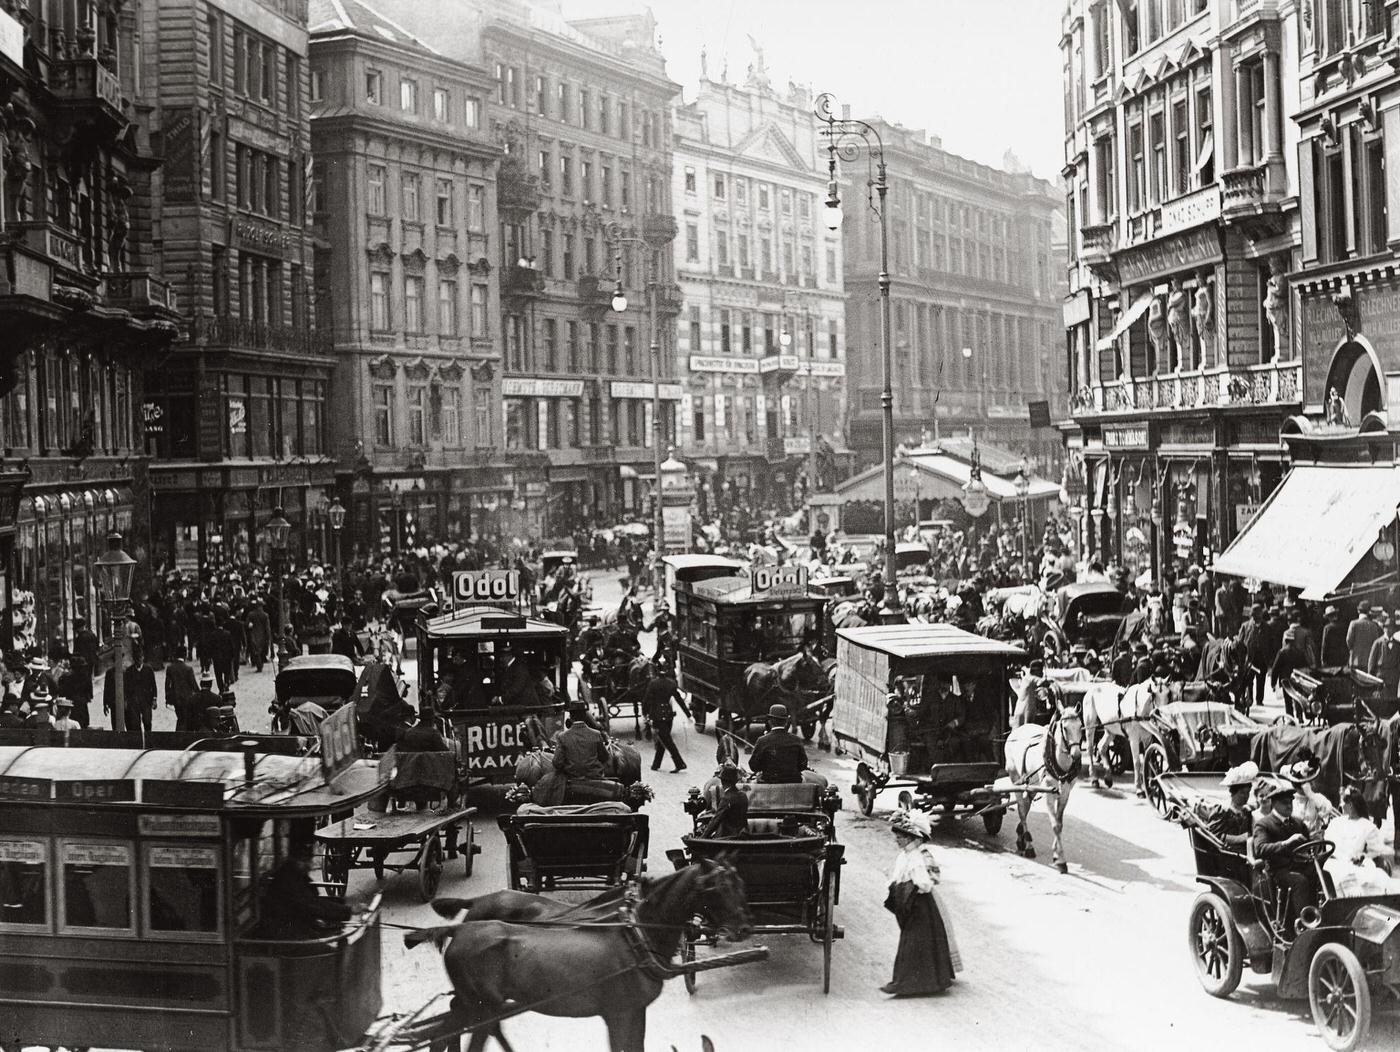 View from Stock-in-Eisen-Square towards Graben street, Horse carriage in foreground, About 1908